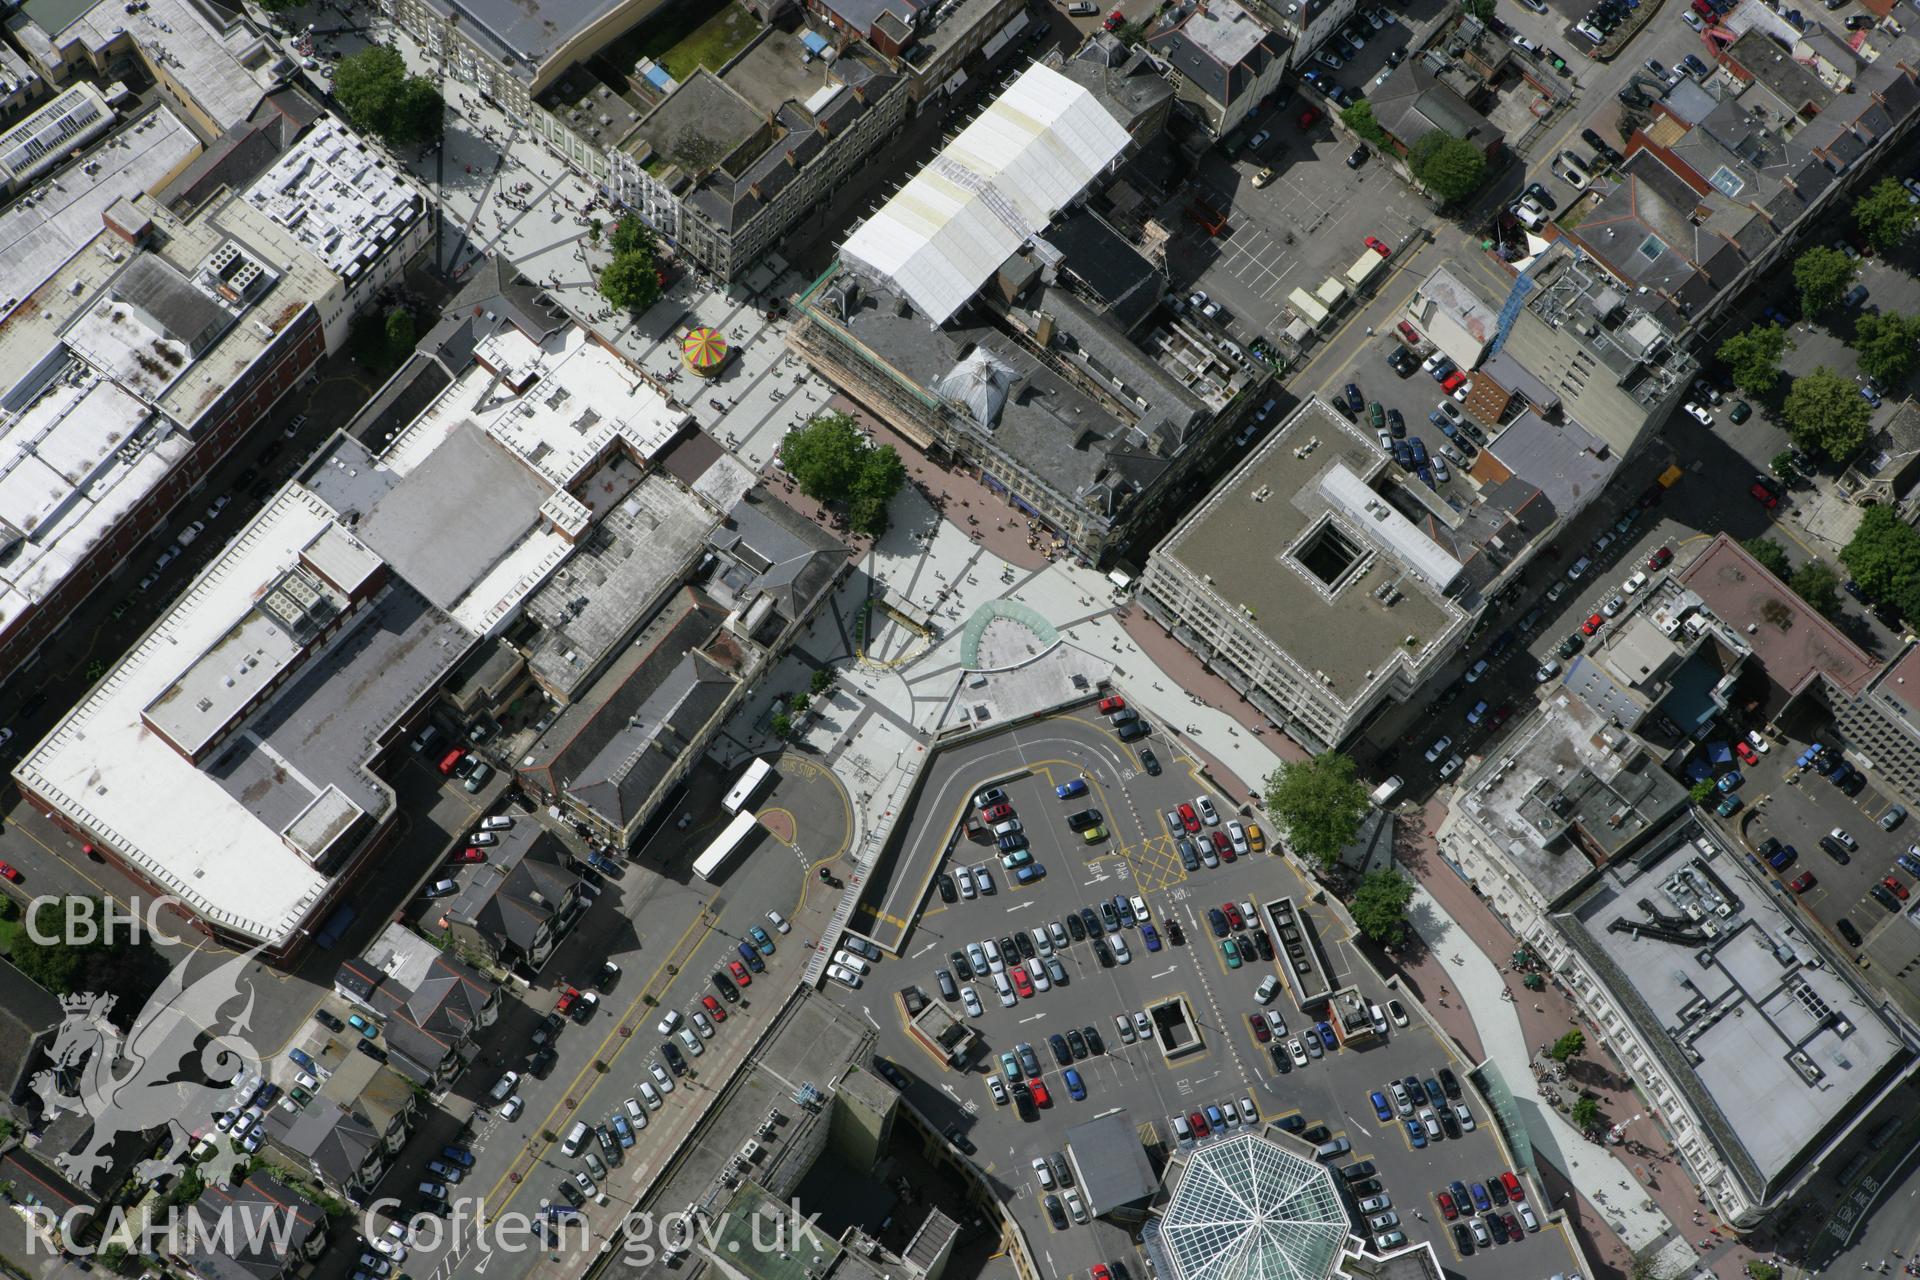 RCAHMW colour oblique aerial photograph of Cardiff. The city centre with Queen Street and the Capitol Shopping Centre. Taken on 30 July 2007 by Toby Driver